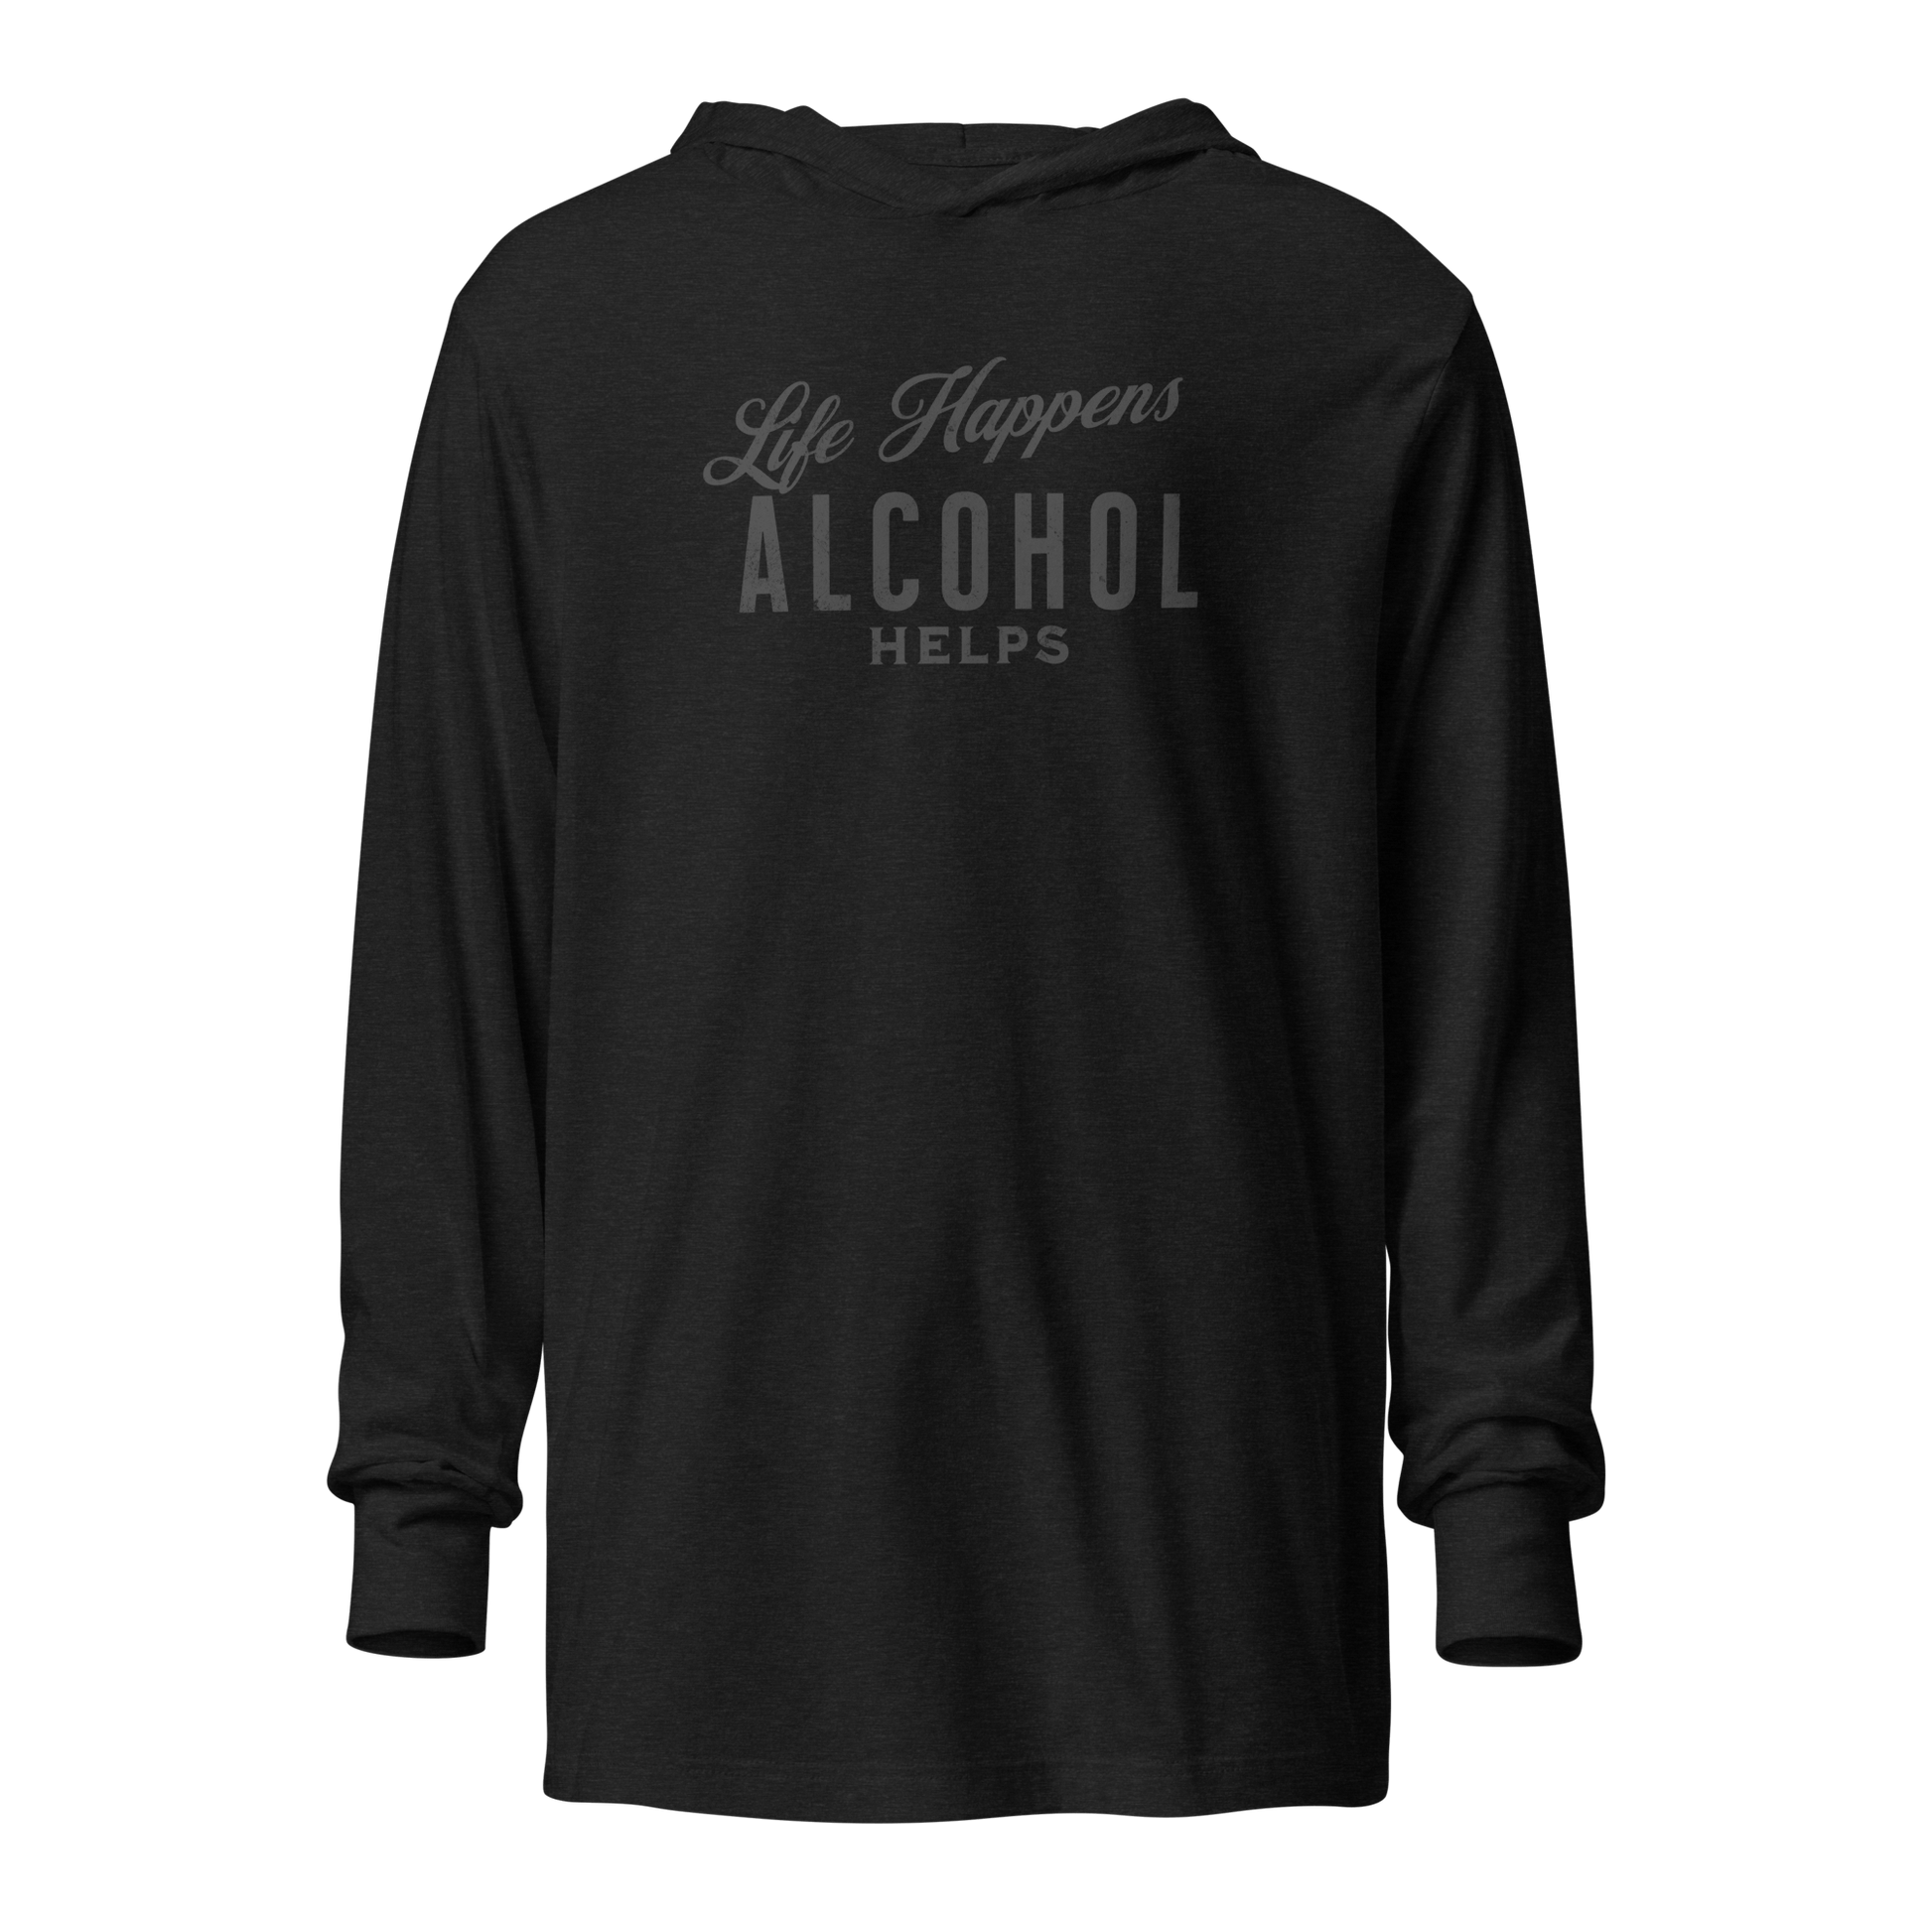 Life Happens Alcohol Helps Lightweight Hoodie - Stay Cozy! Elevate your style with our funny drinking-themed Life Happens Whiskey Helps lightweight hoodie. Perfect for layering and unrestricted comfort all year round.